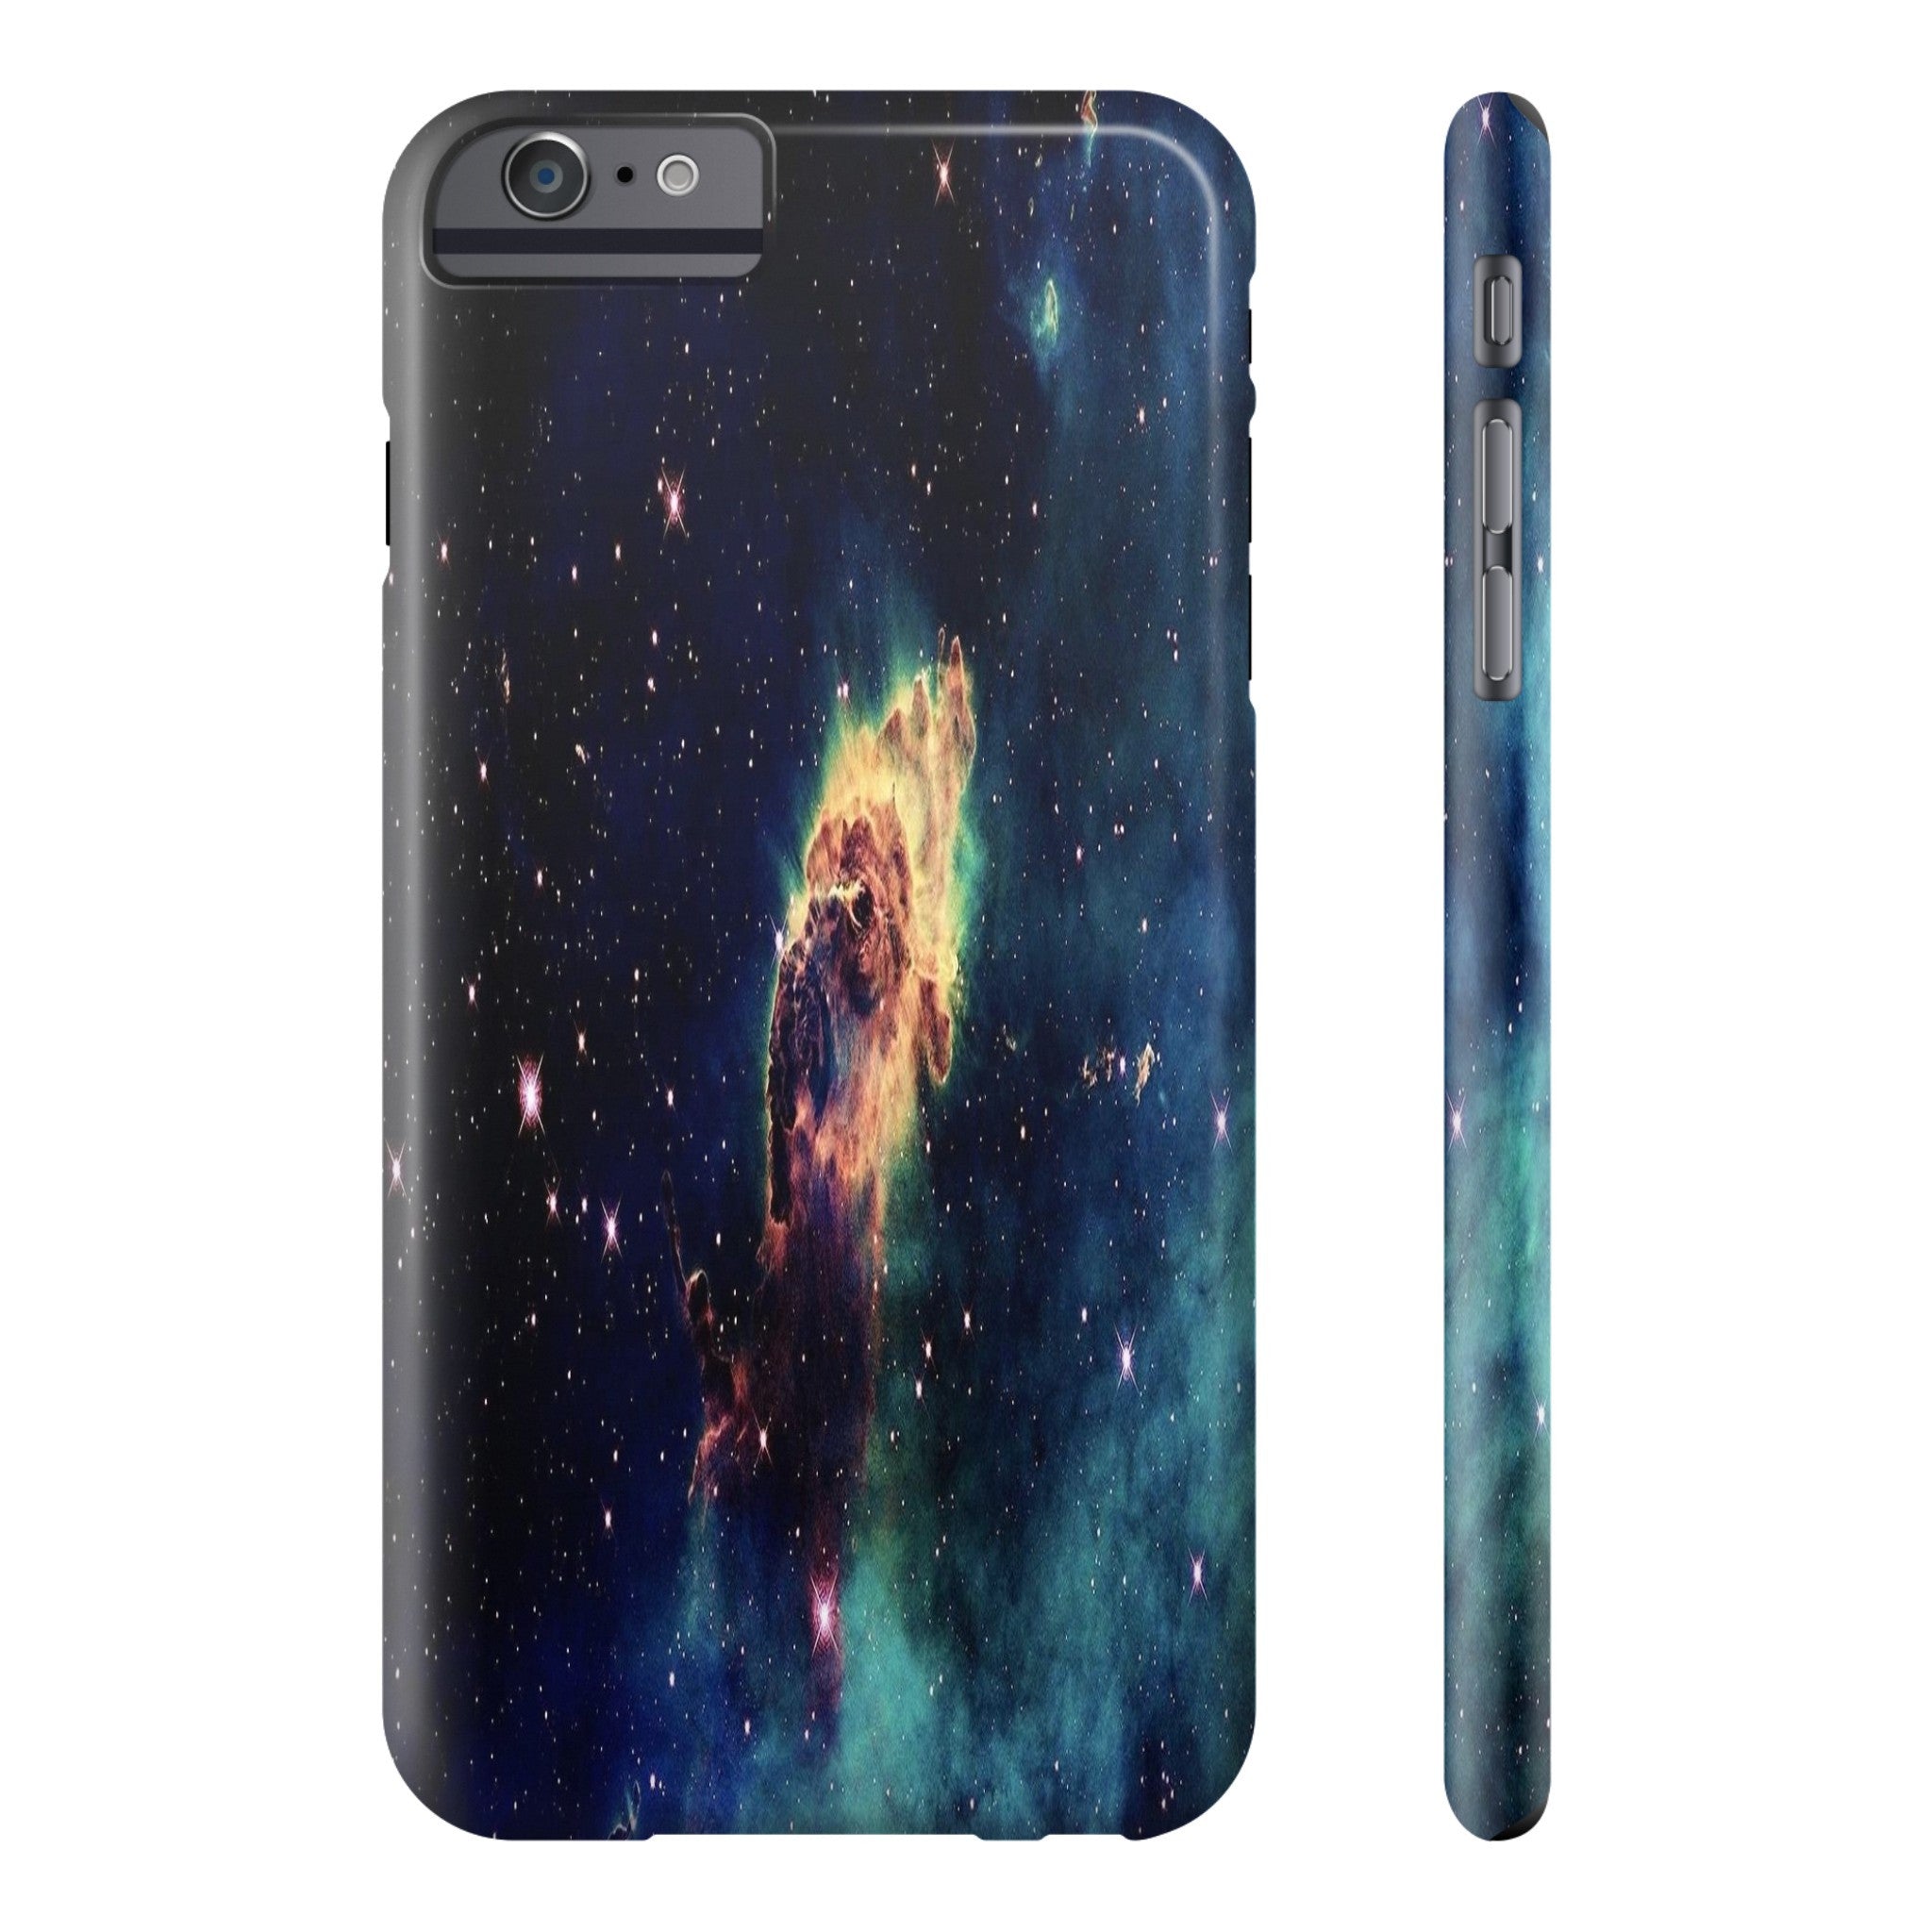 Outer Space  Slim Iphone 6/6s Plus